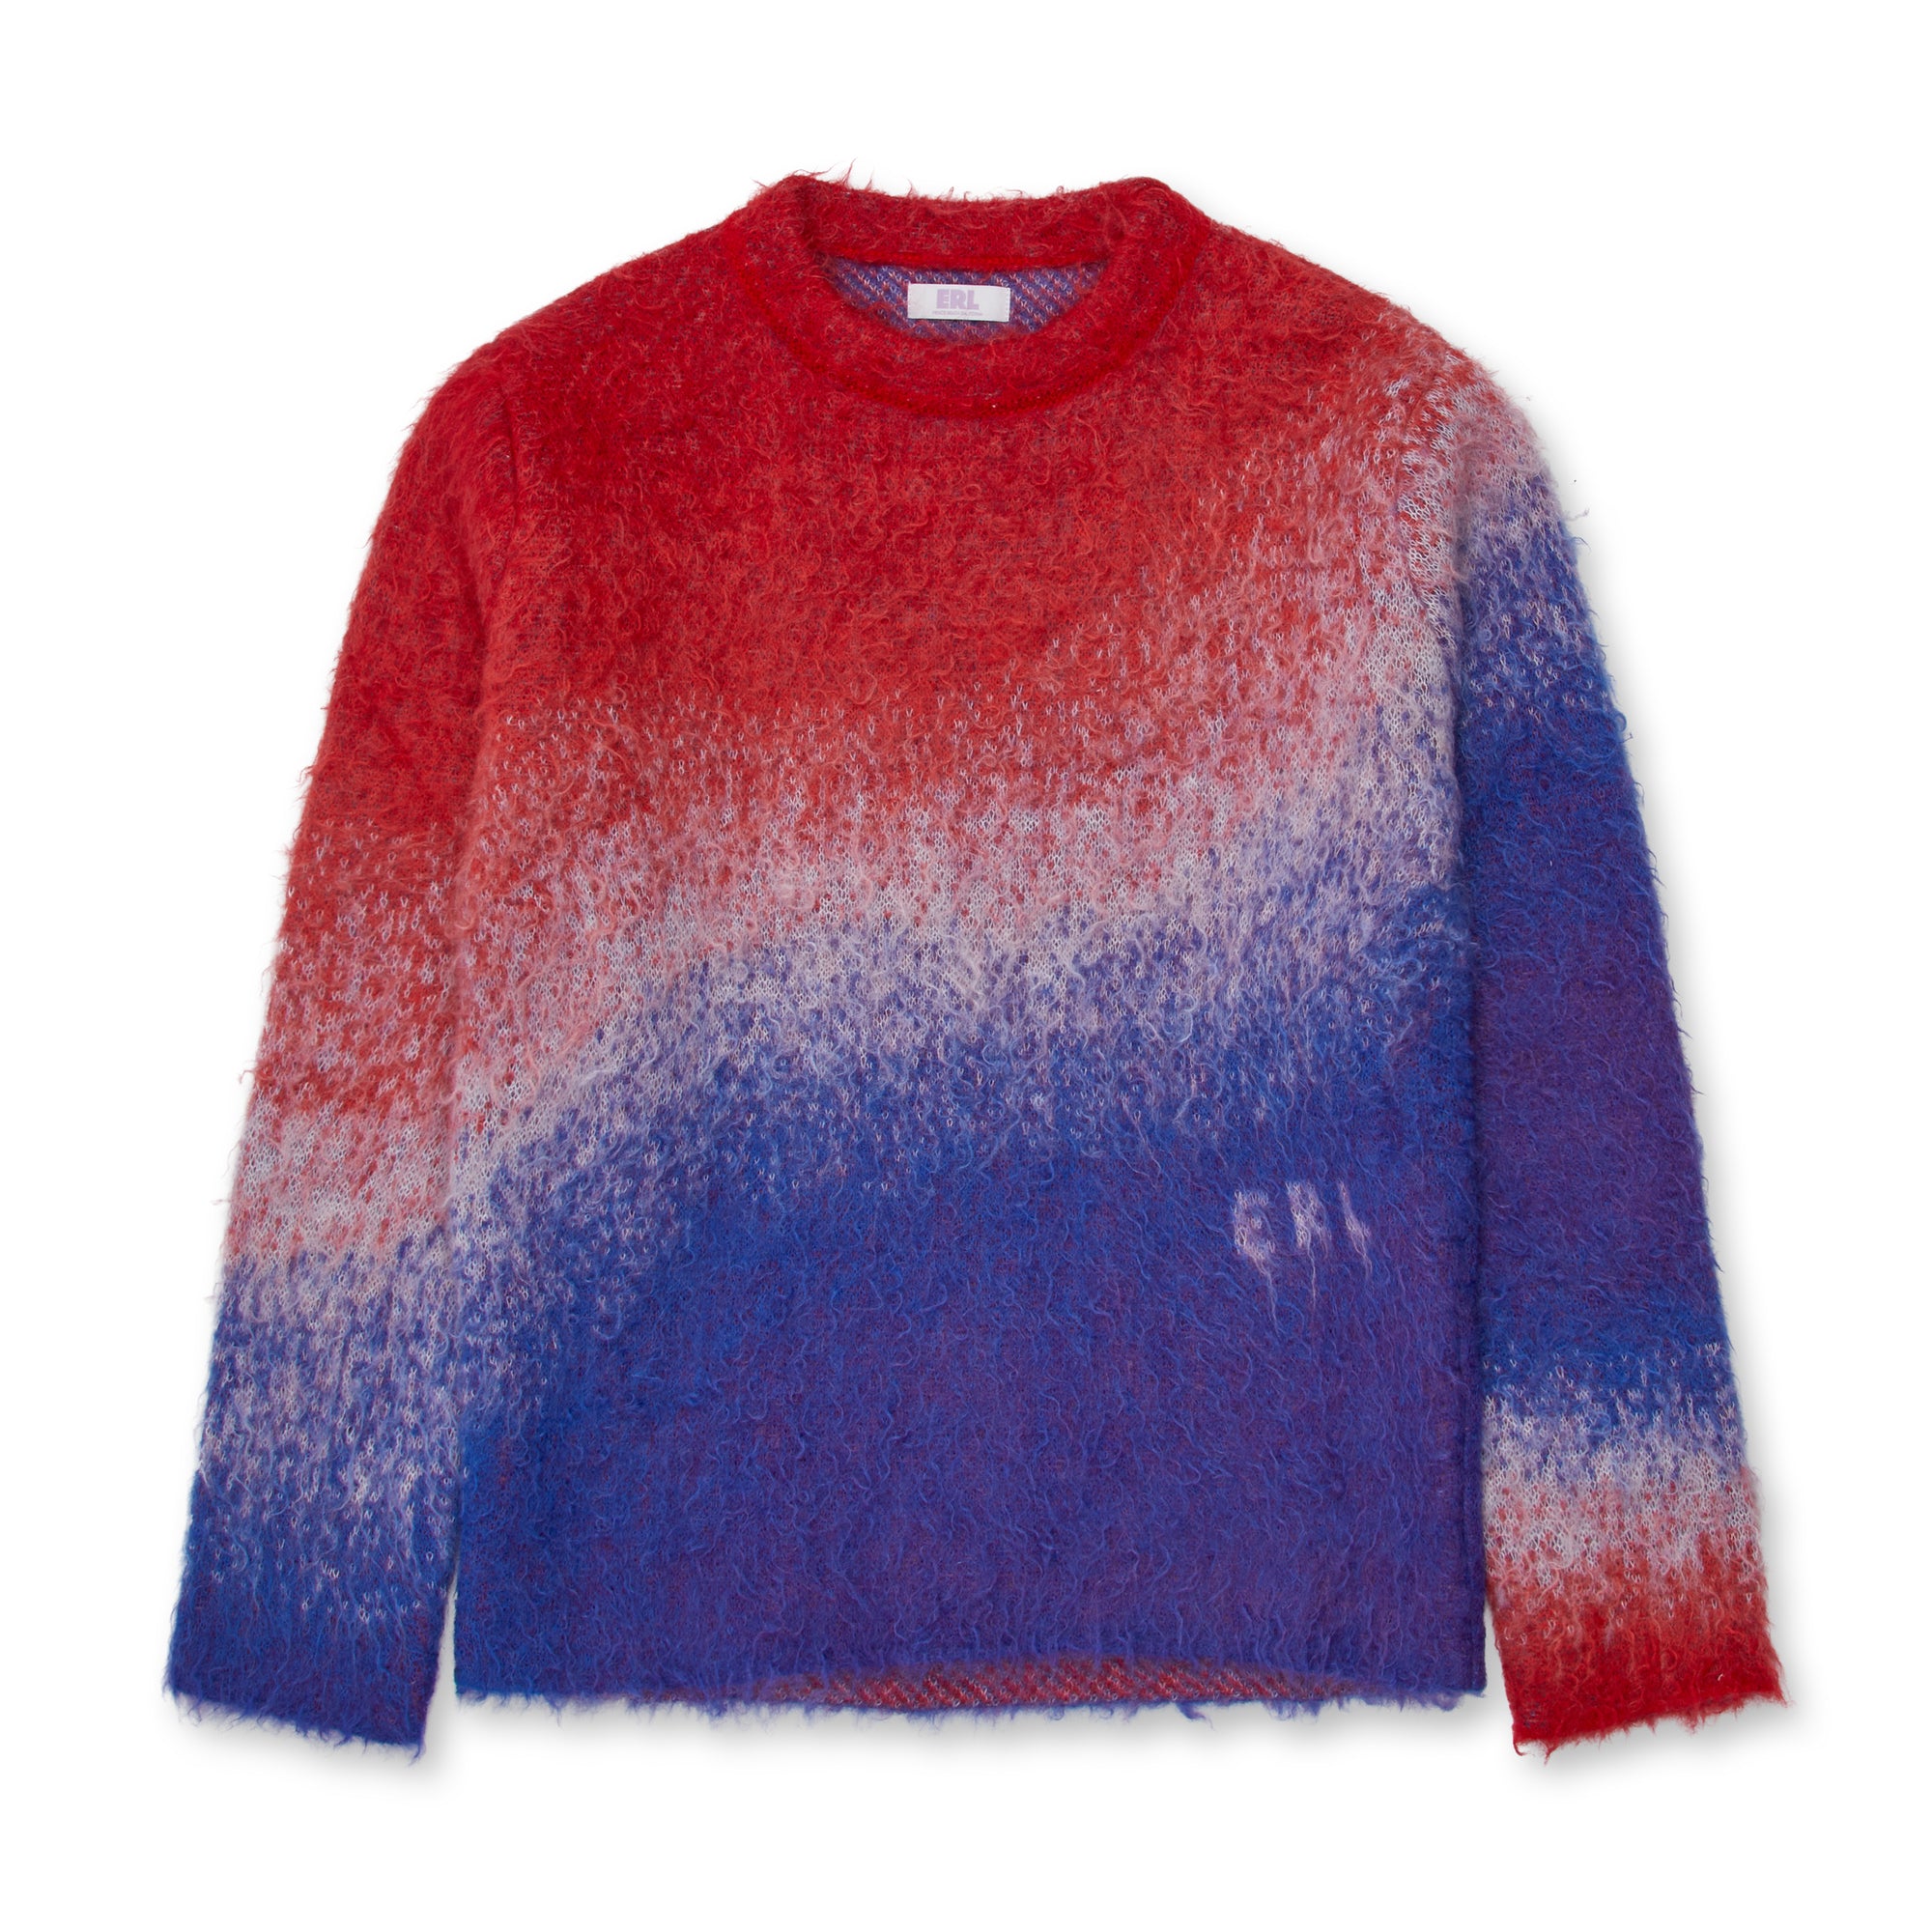 ERL - Men's Degrade Gradient Sweater - (Blue/Red) view 1